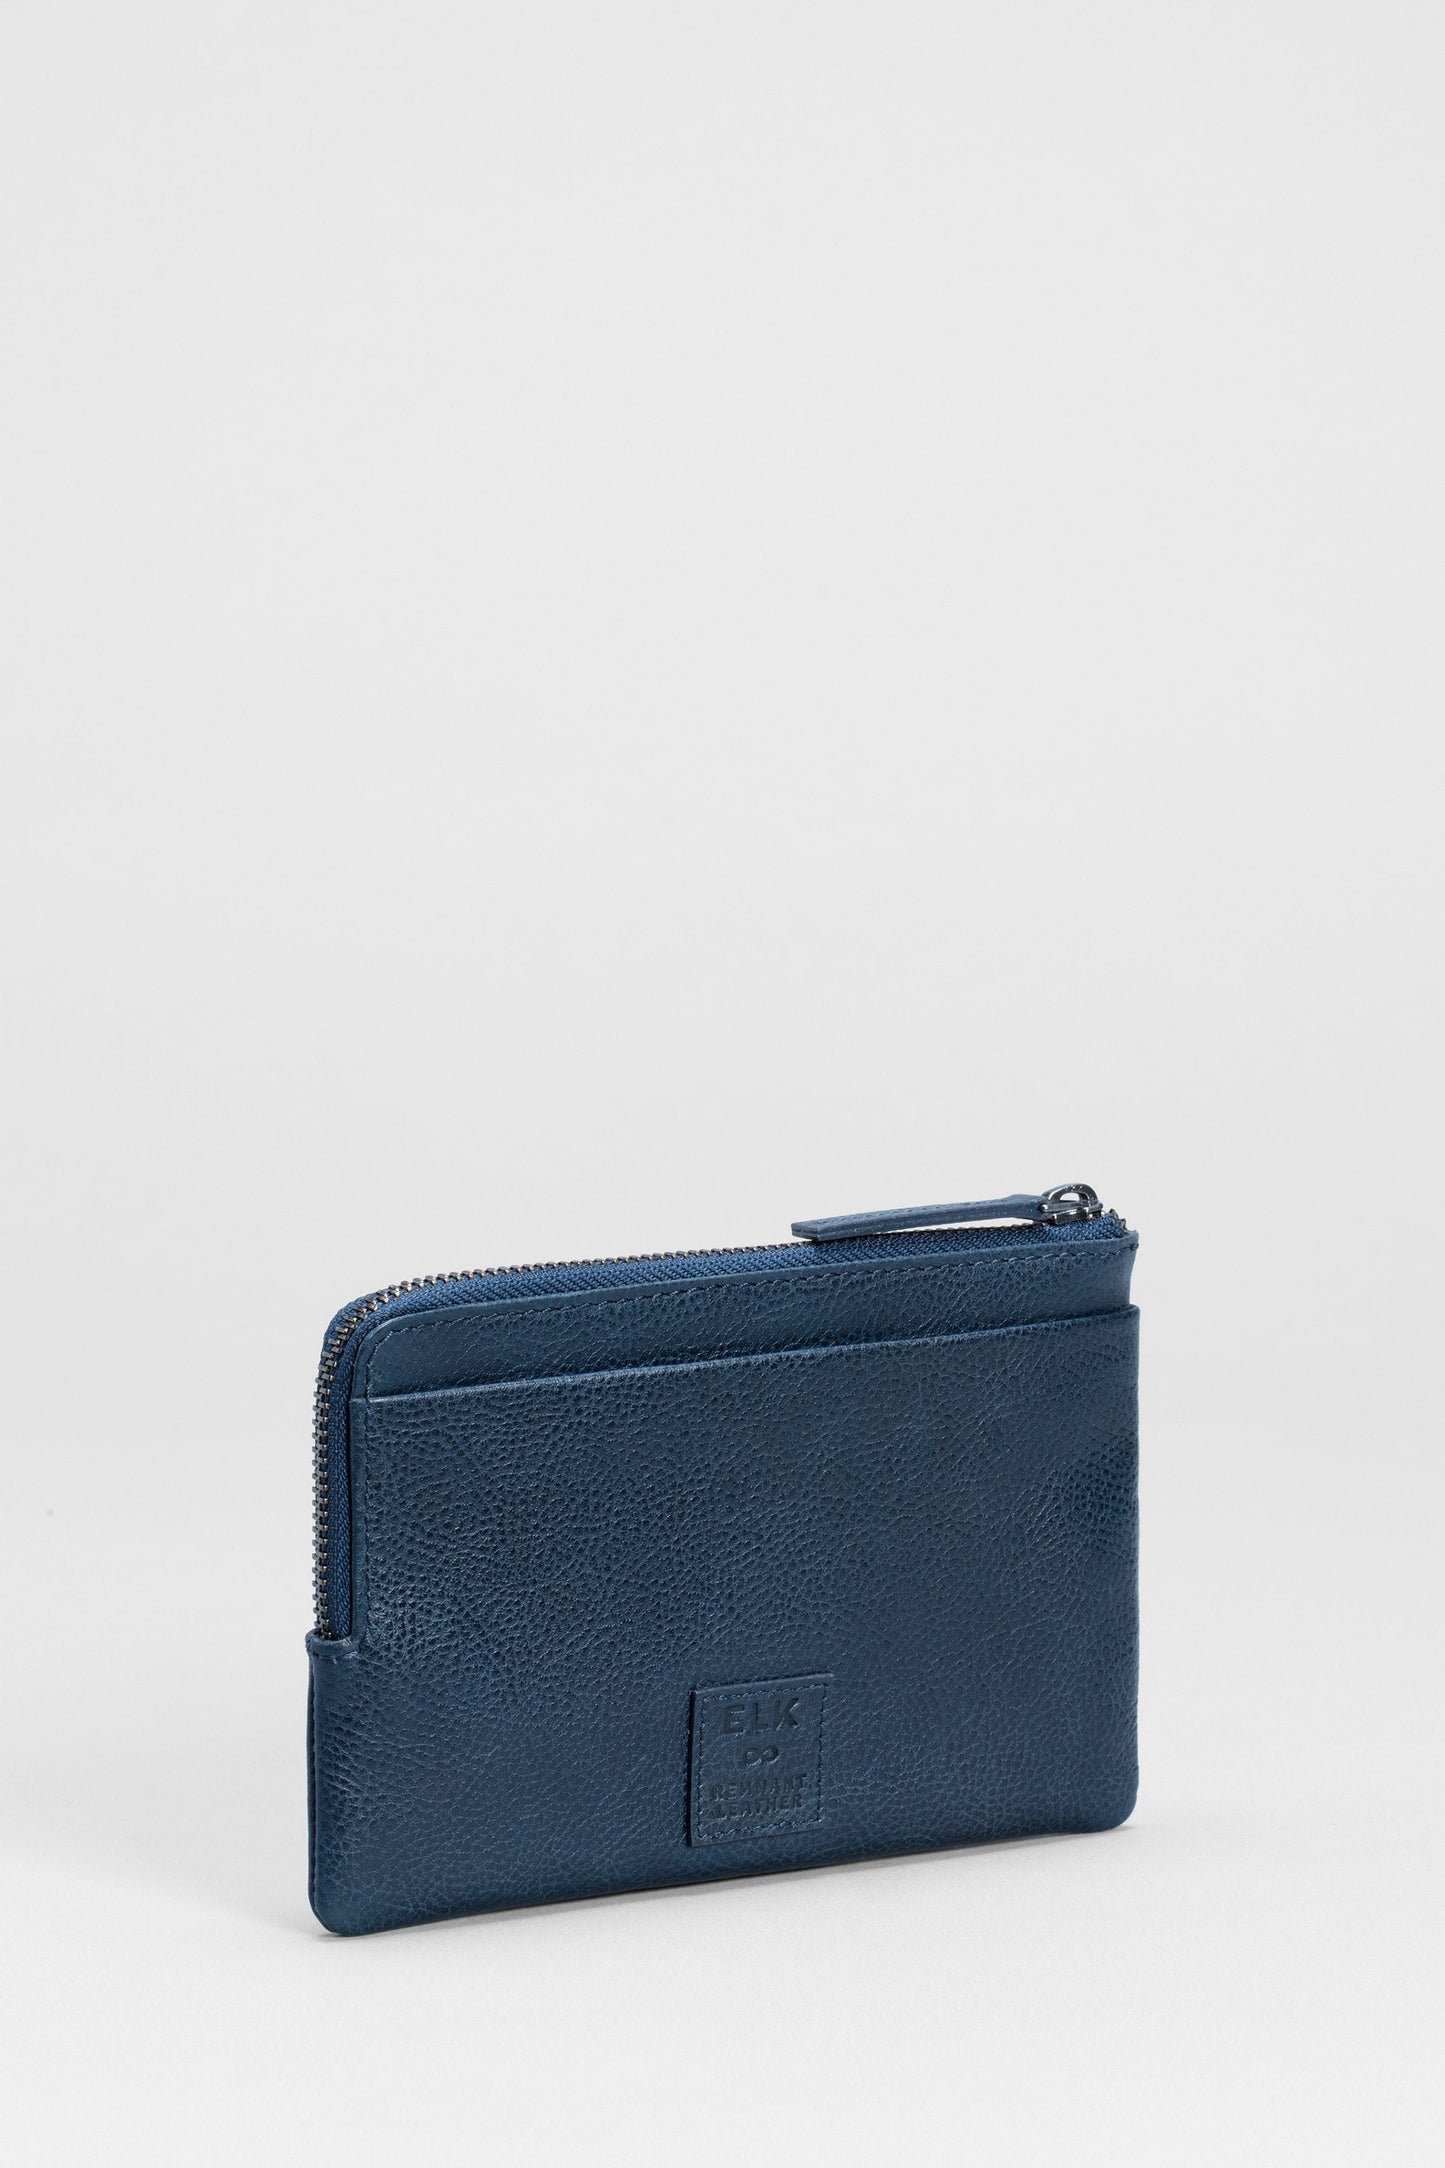 Kaia Zip Remnant Cow Leather Coin Purse Pouch Back | NAVY